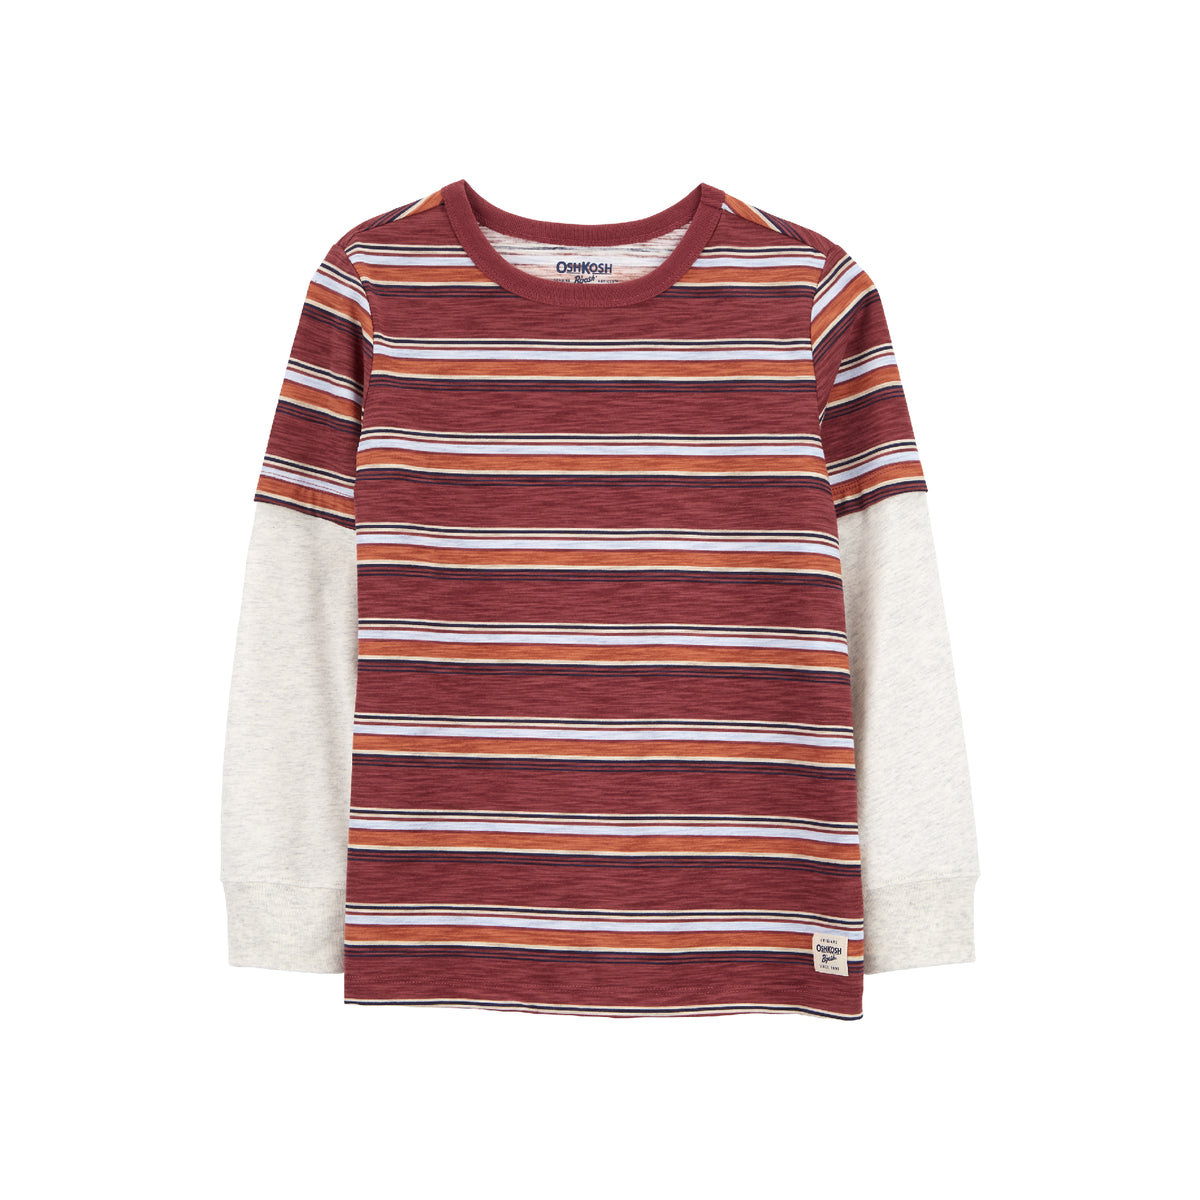 OshKosh red and white striped long-sleeved top (4-7)